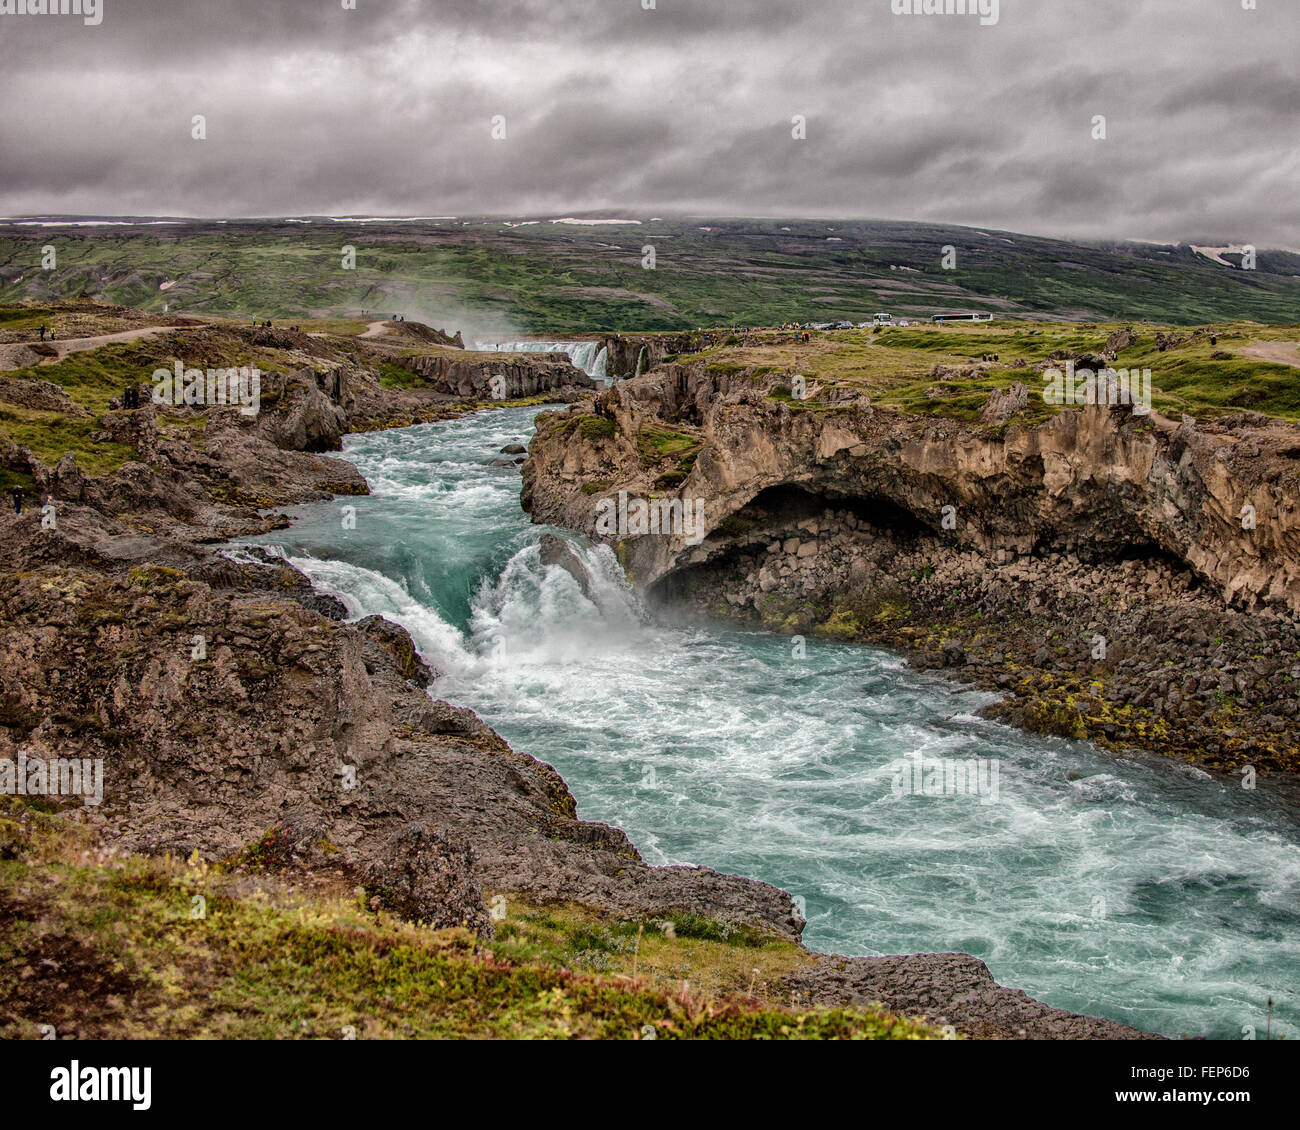 Aug. 1, 2015 - BÃ¡RÃ°Ardalur District, North-Central Iceland, Iceland - Geitafoss is a smaller, but no-less-powerful, waterfall on the SkjÃ¡lfandafljÃ³t river, just downstream from the spectacular, popular, famed GoÃ°afoss falls in the distance. Below the Godafoss falls, the river flows through a narrow cataract 50-75 ft (15-23 m) wide with violent wave action and much froth and spume. Tourism has become a growing sector of the economy and Iceland has become a favorite tourist destination. © Arnold Drapkin/ZUMA Wire/Alamy Live News Stock Photo